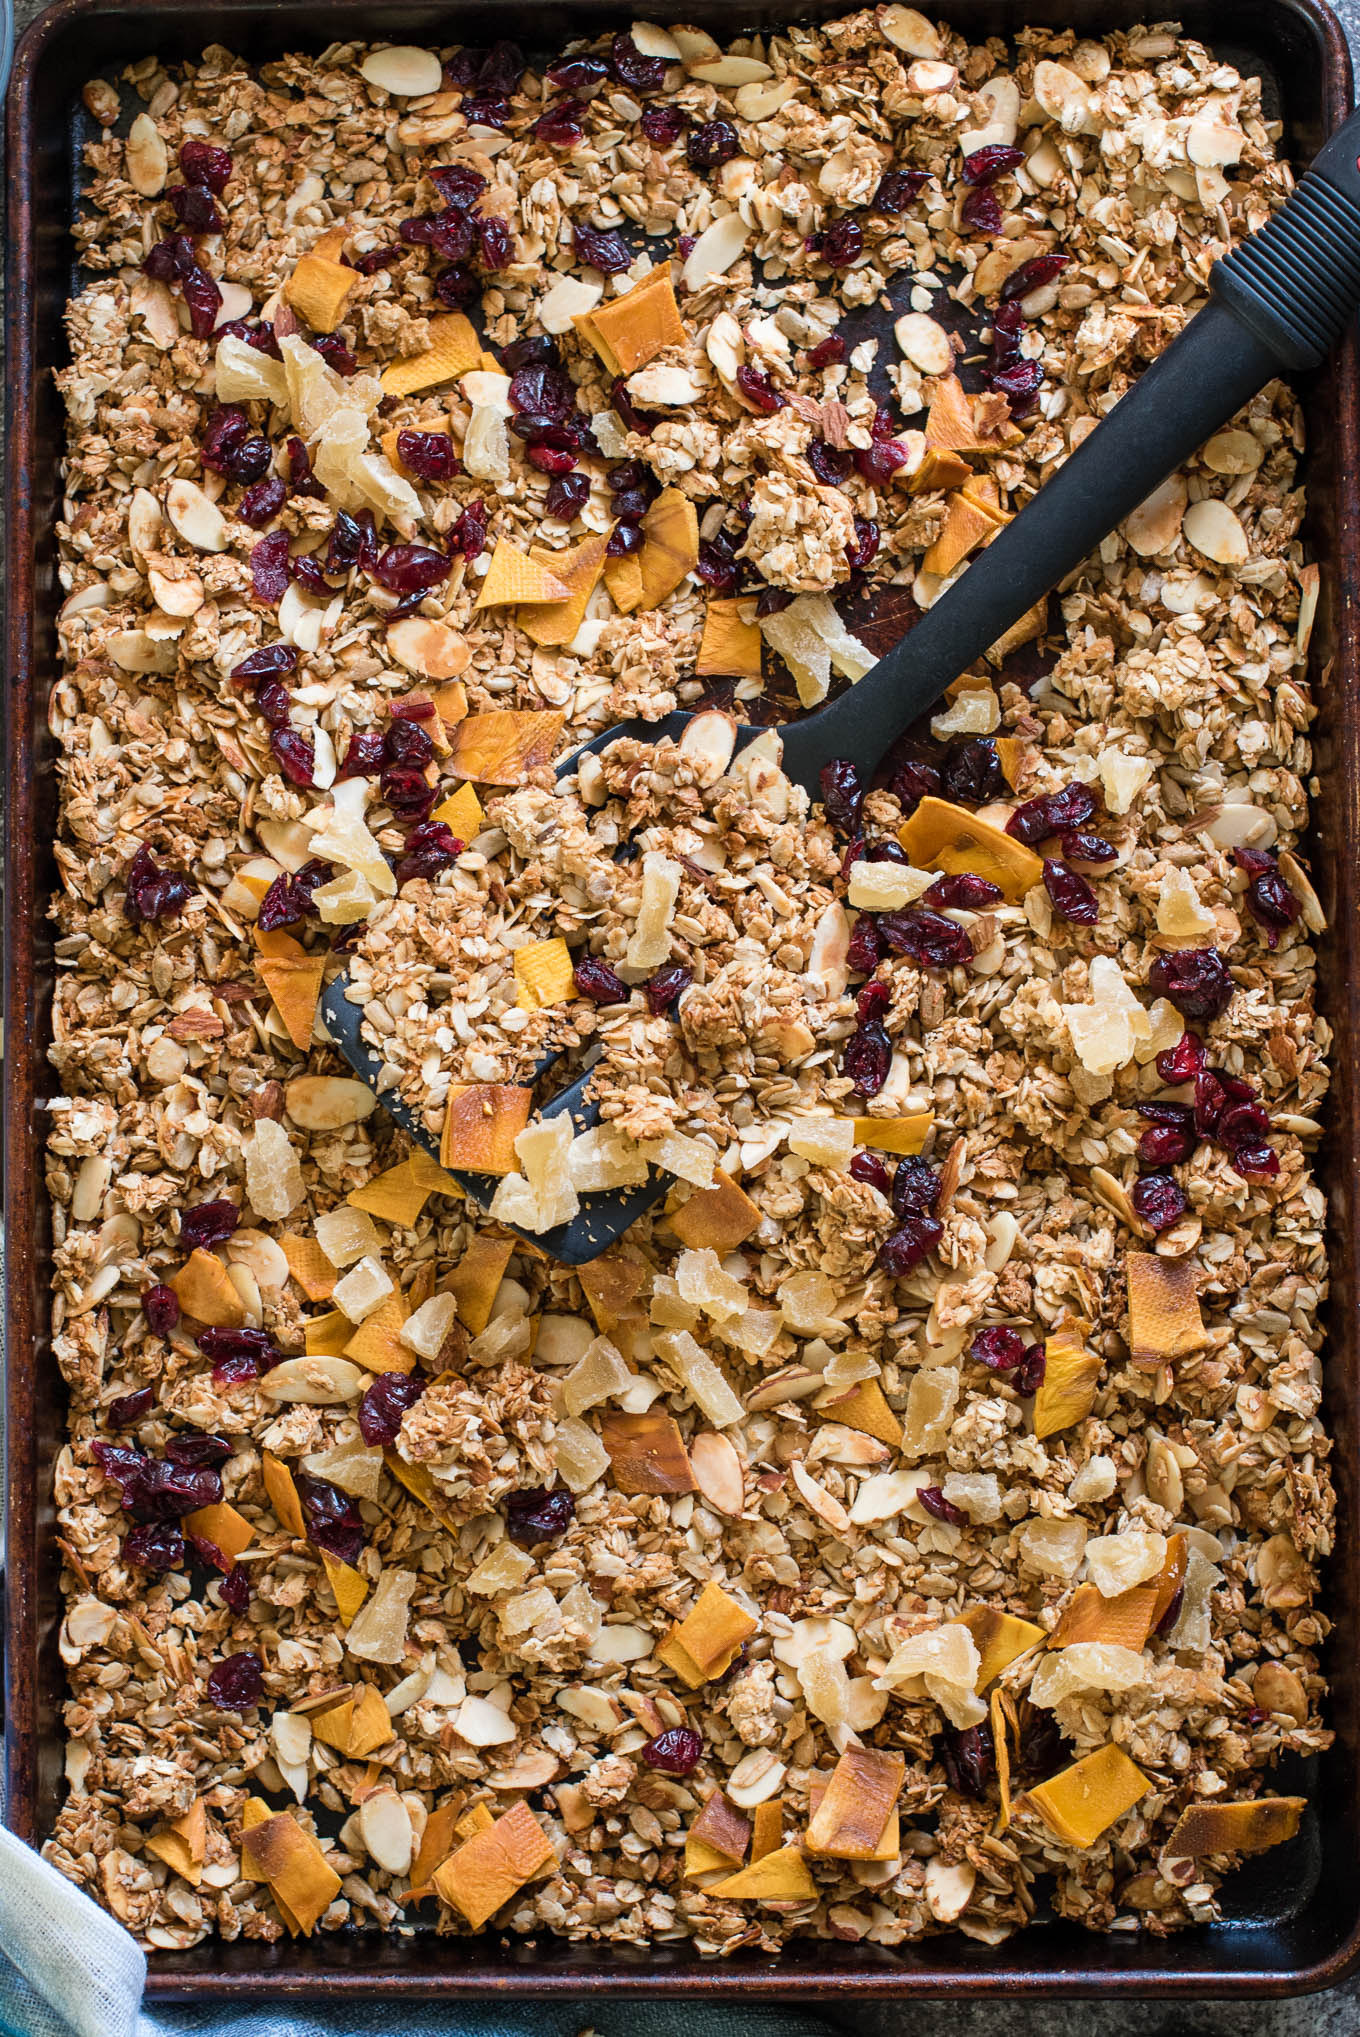 Serve this Easy Homemade Granola with milk, over Greek yogurt or straight from the tin for a healthy breakfast or snack! Made with rolled oats, coconut, seeds, nuts and fruit- the perfect combo! 